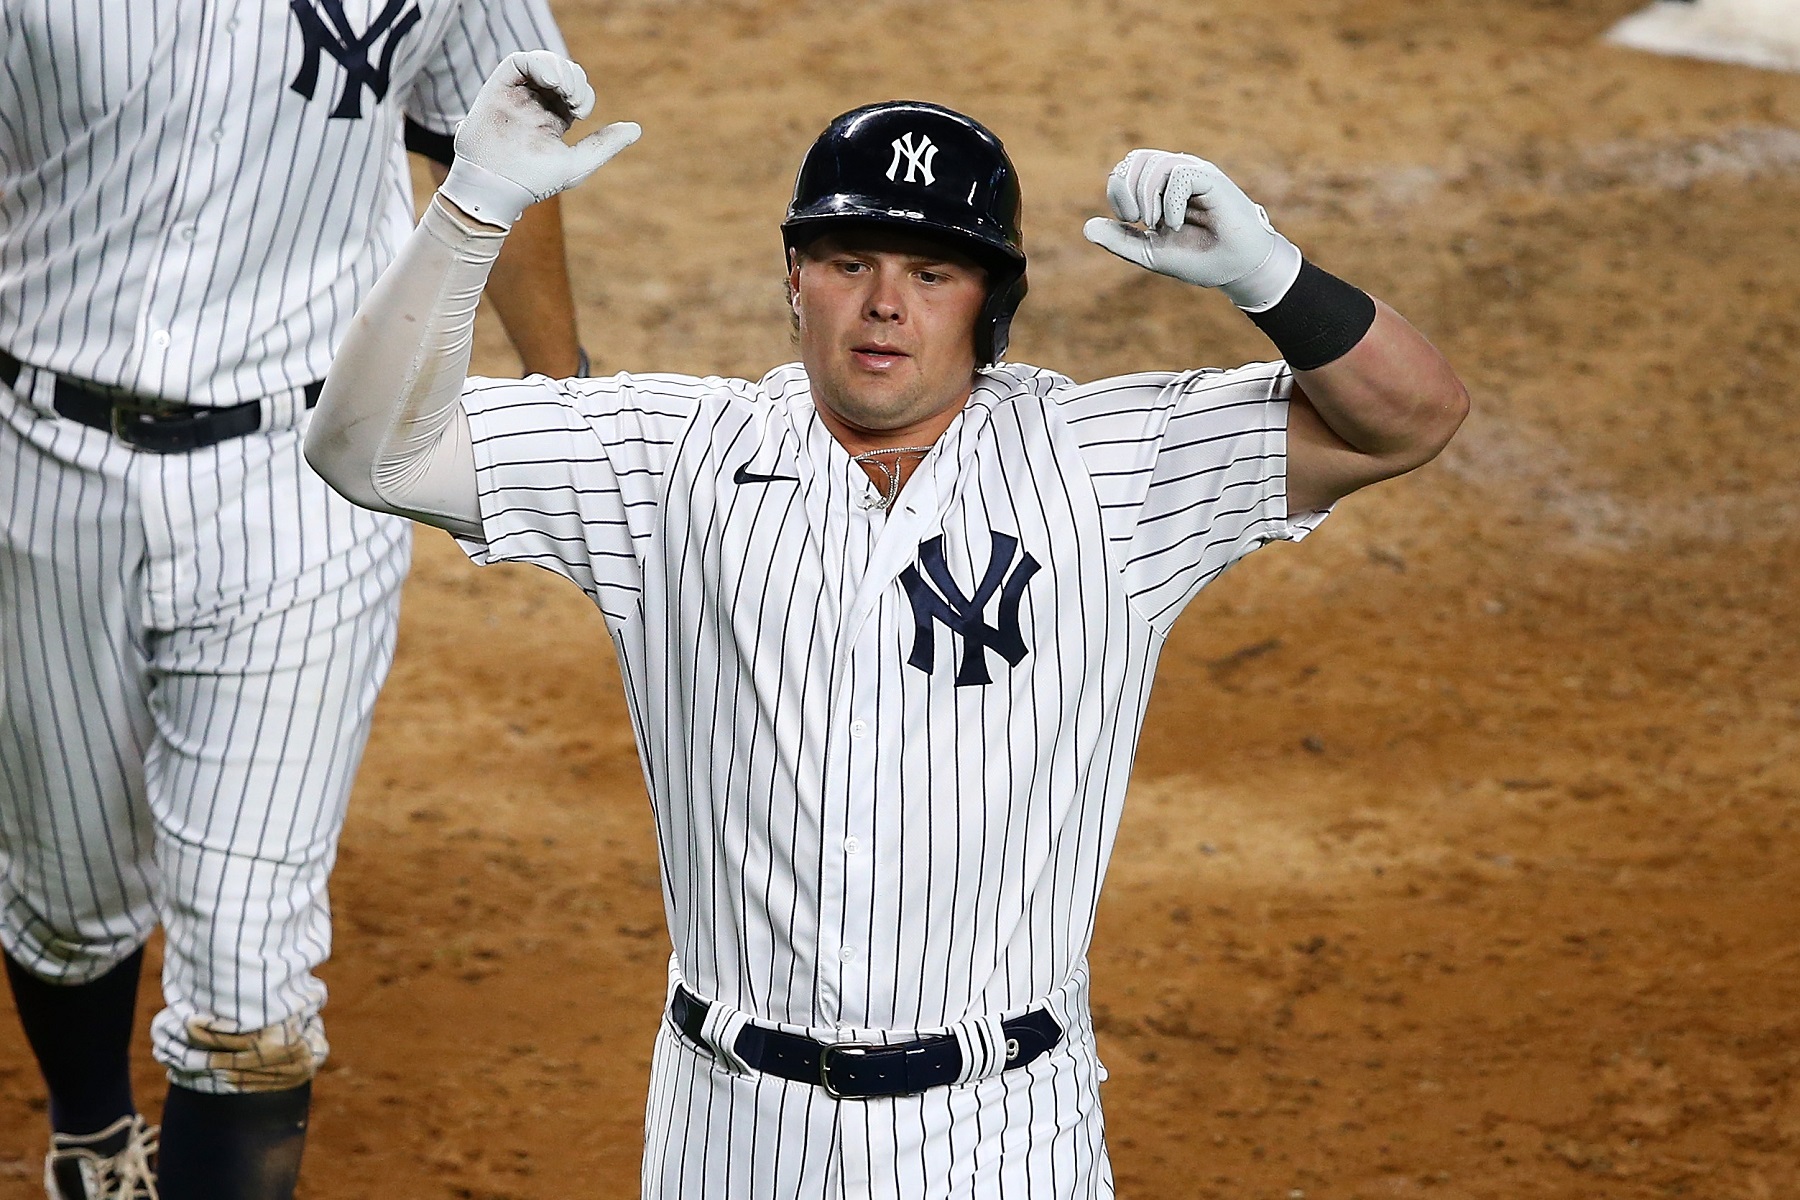 The Luke Voit Trade Has Been a Steal for the New York Yankees